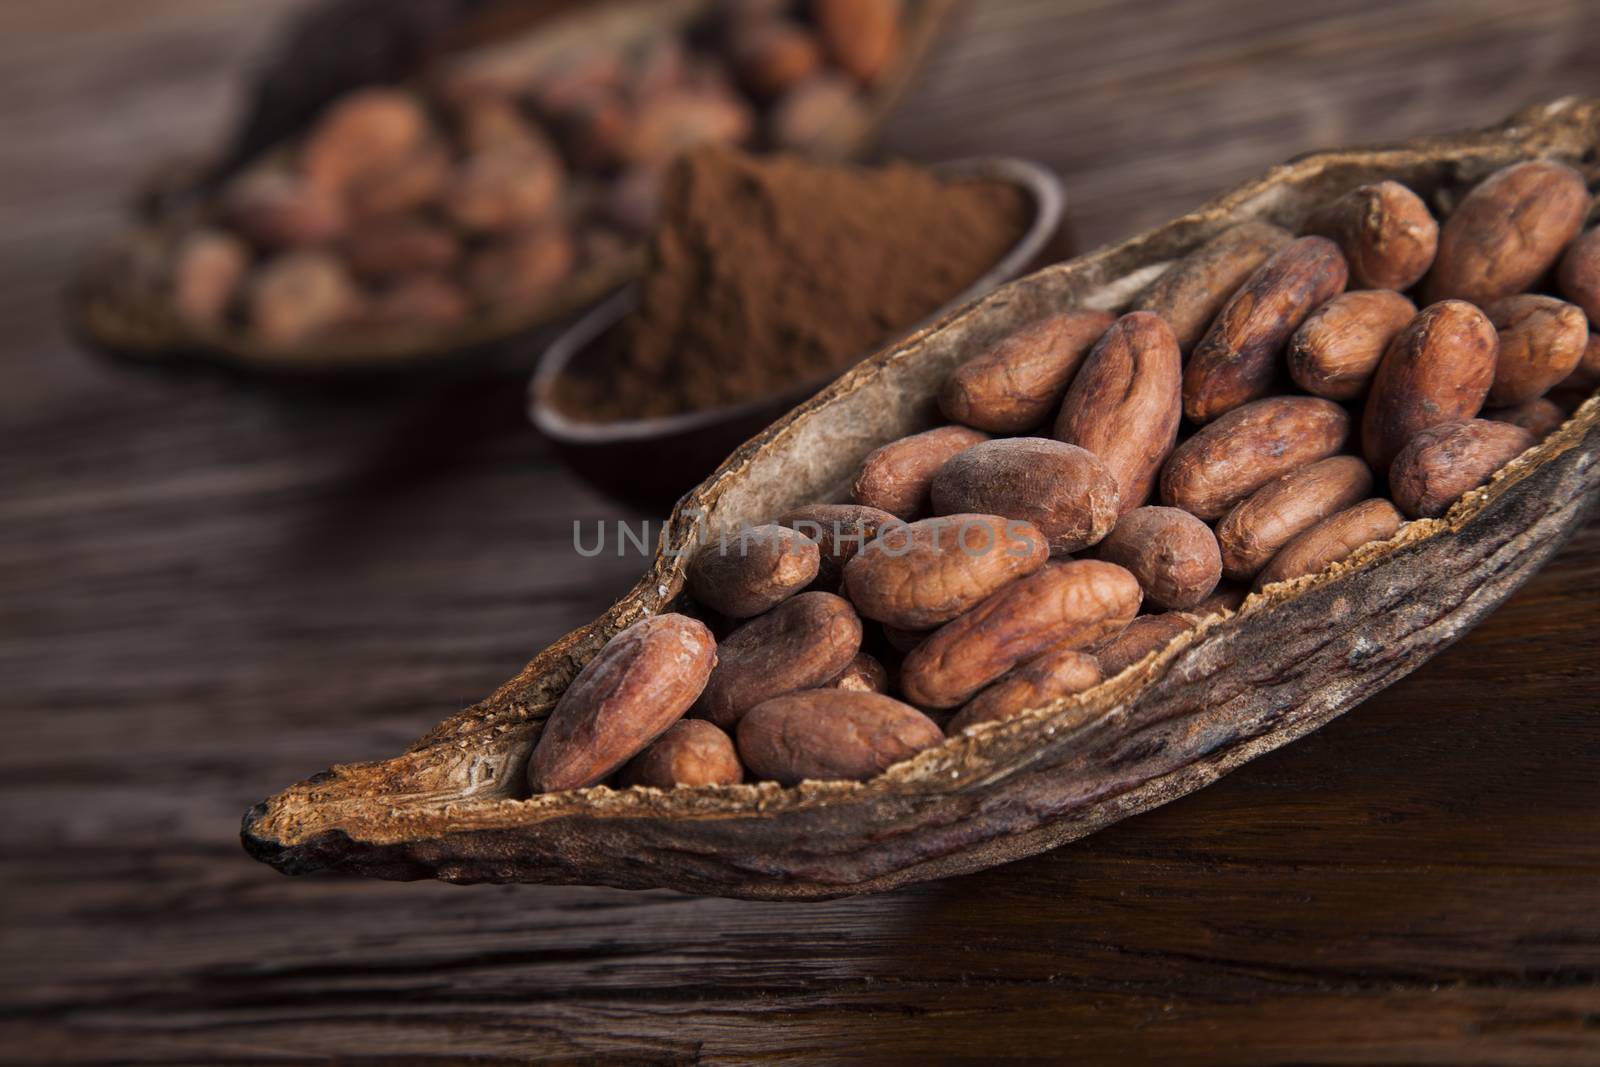 Cocoa beans in the dry cocoa pod fruit on wooden background by JanPietruszka